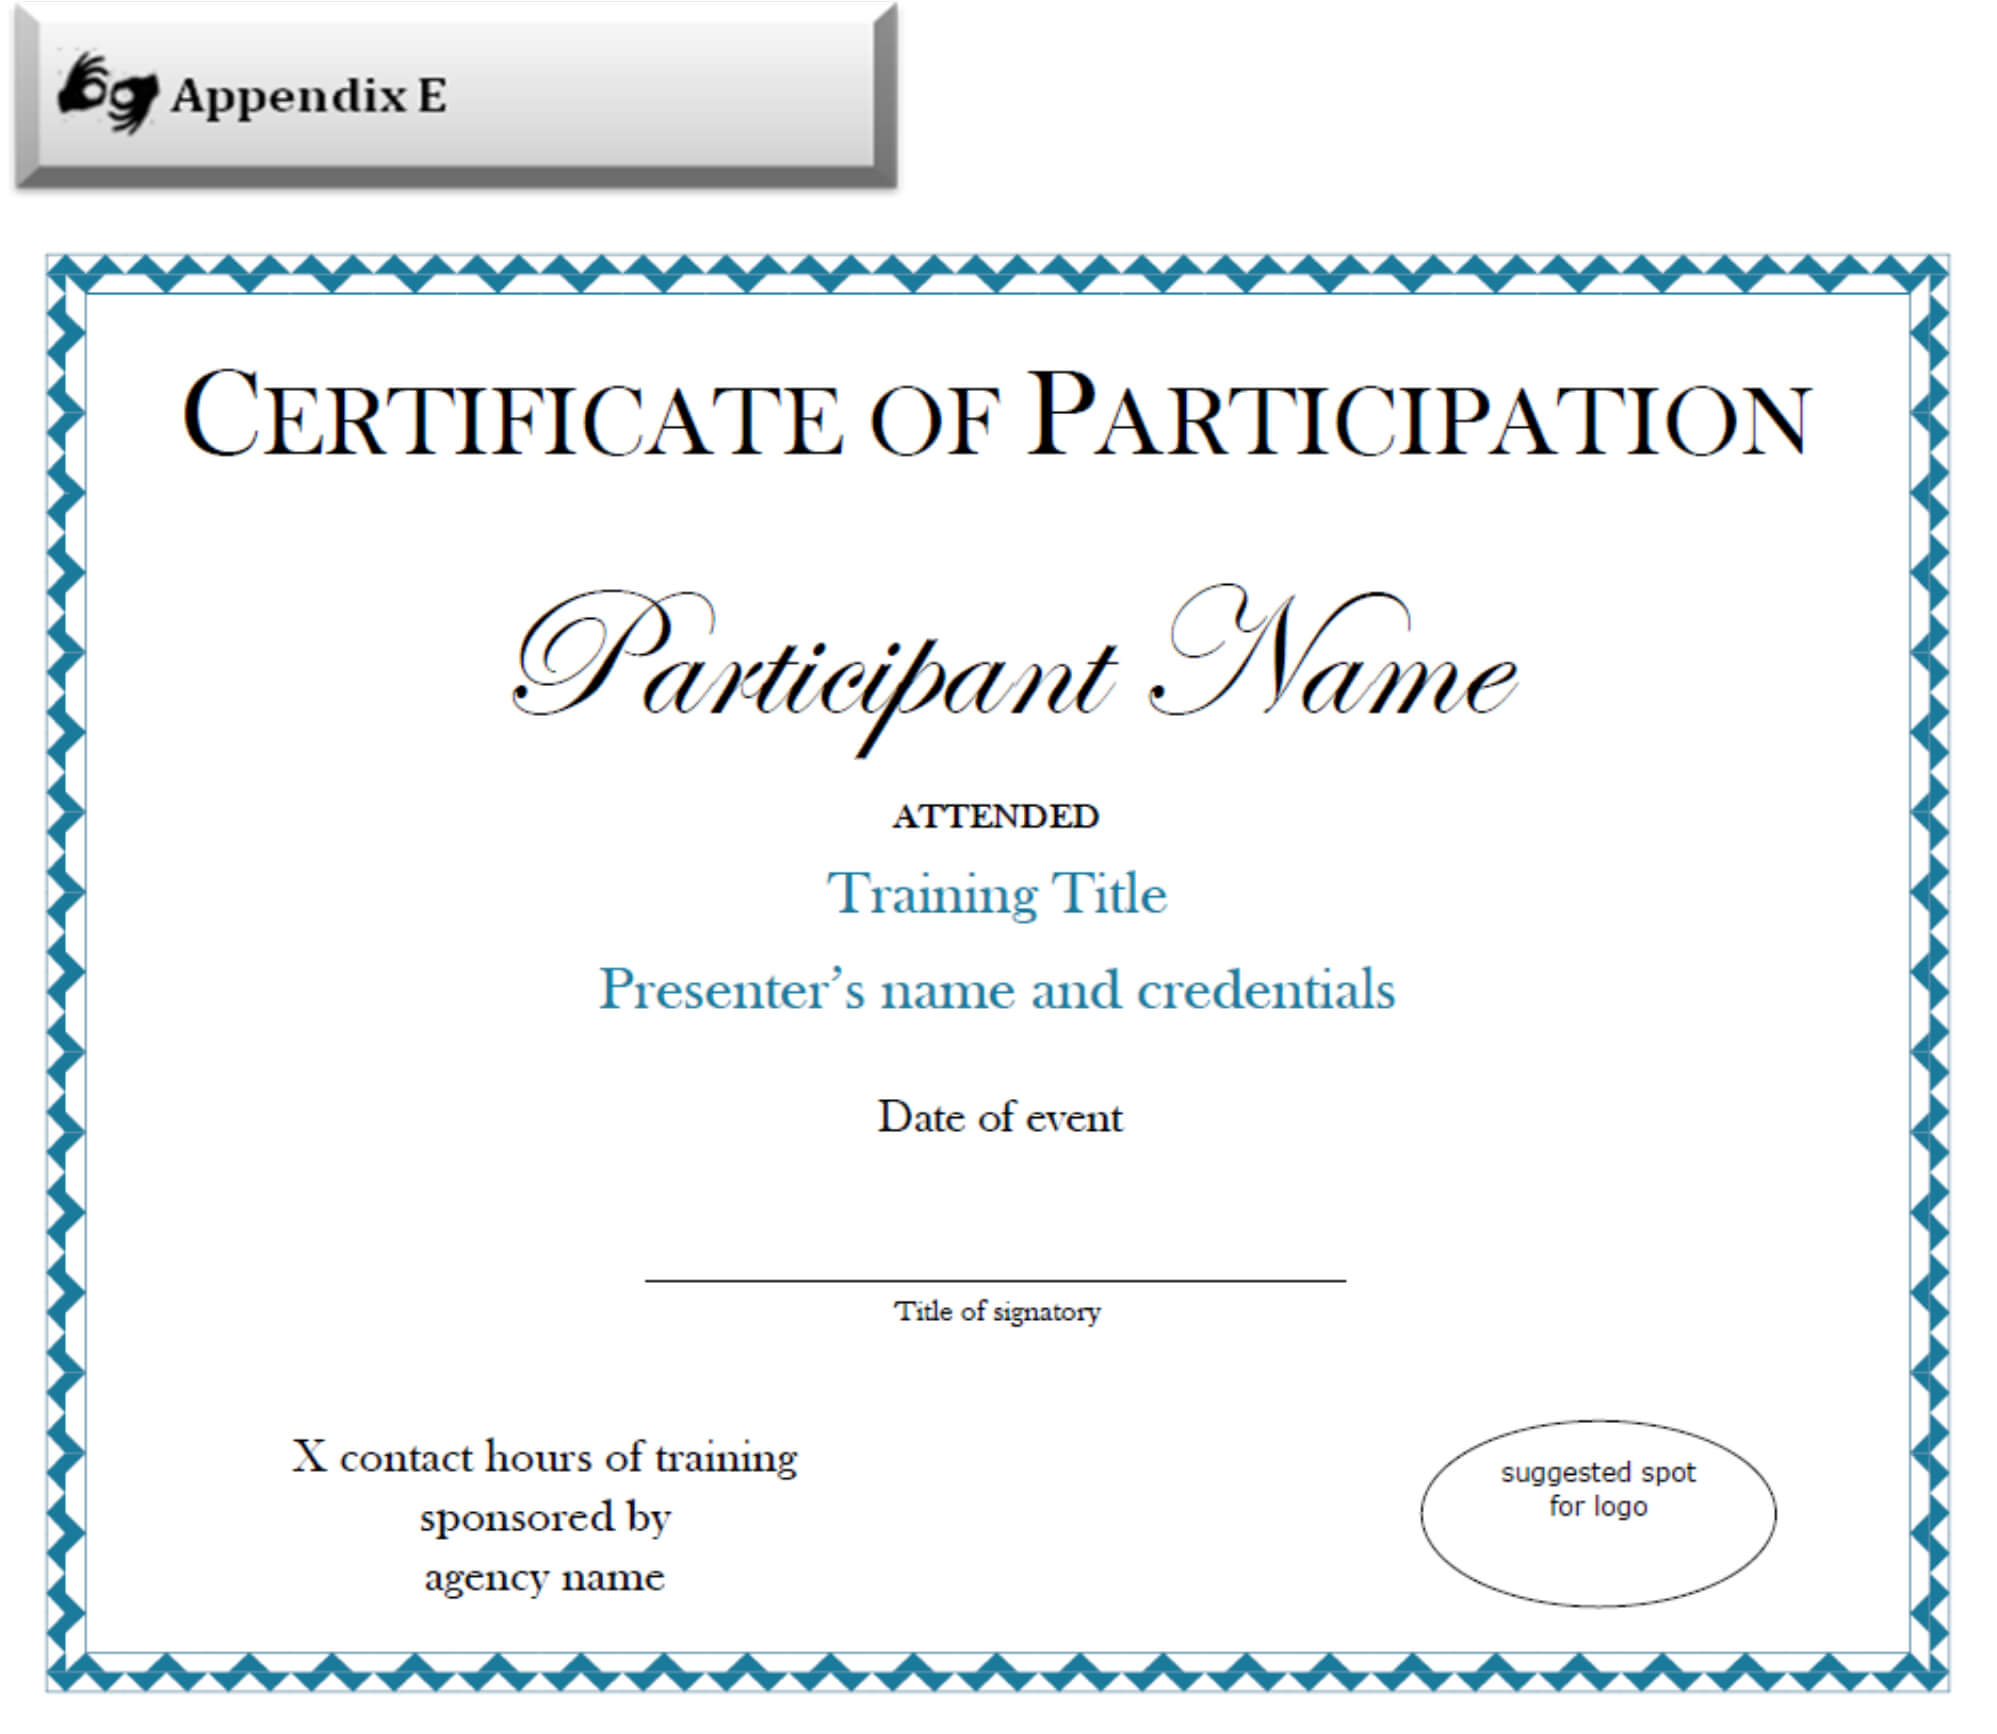 Certificate Of Participation Sample Free Download In Sample Certificate Of Participation Template